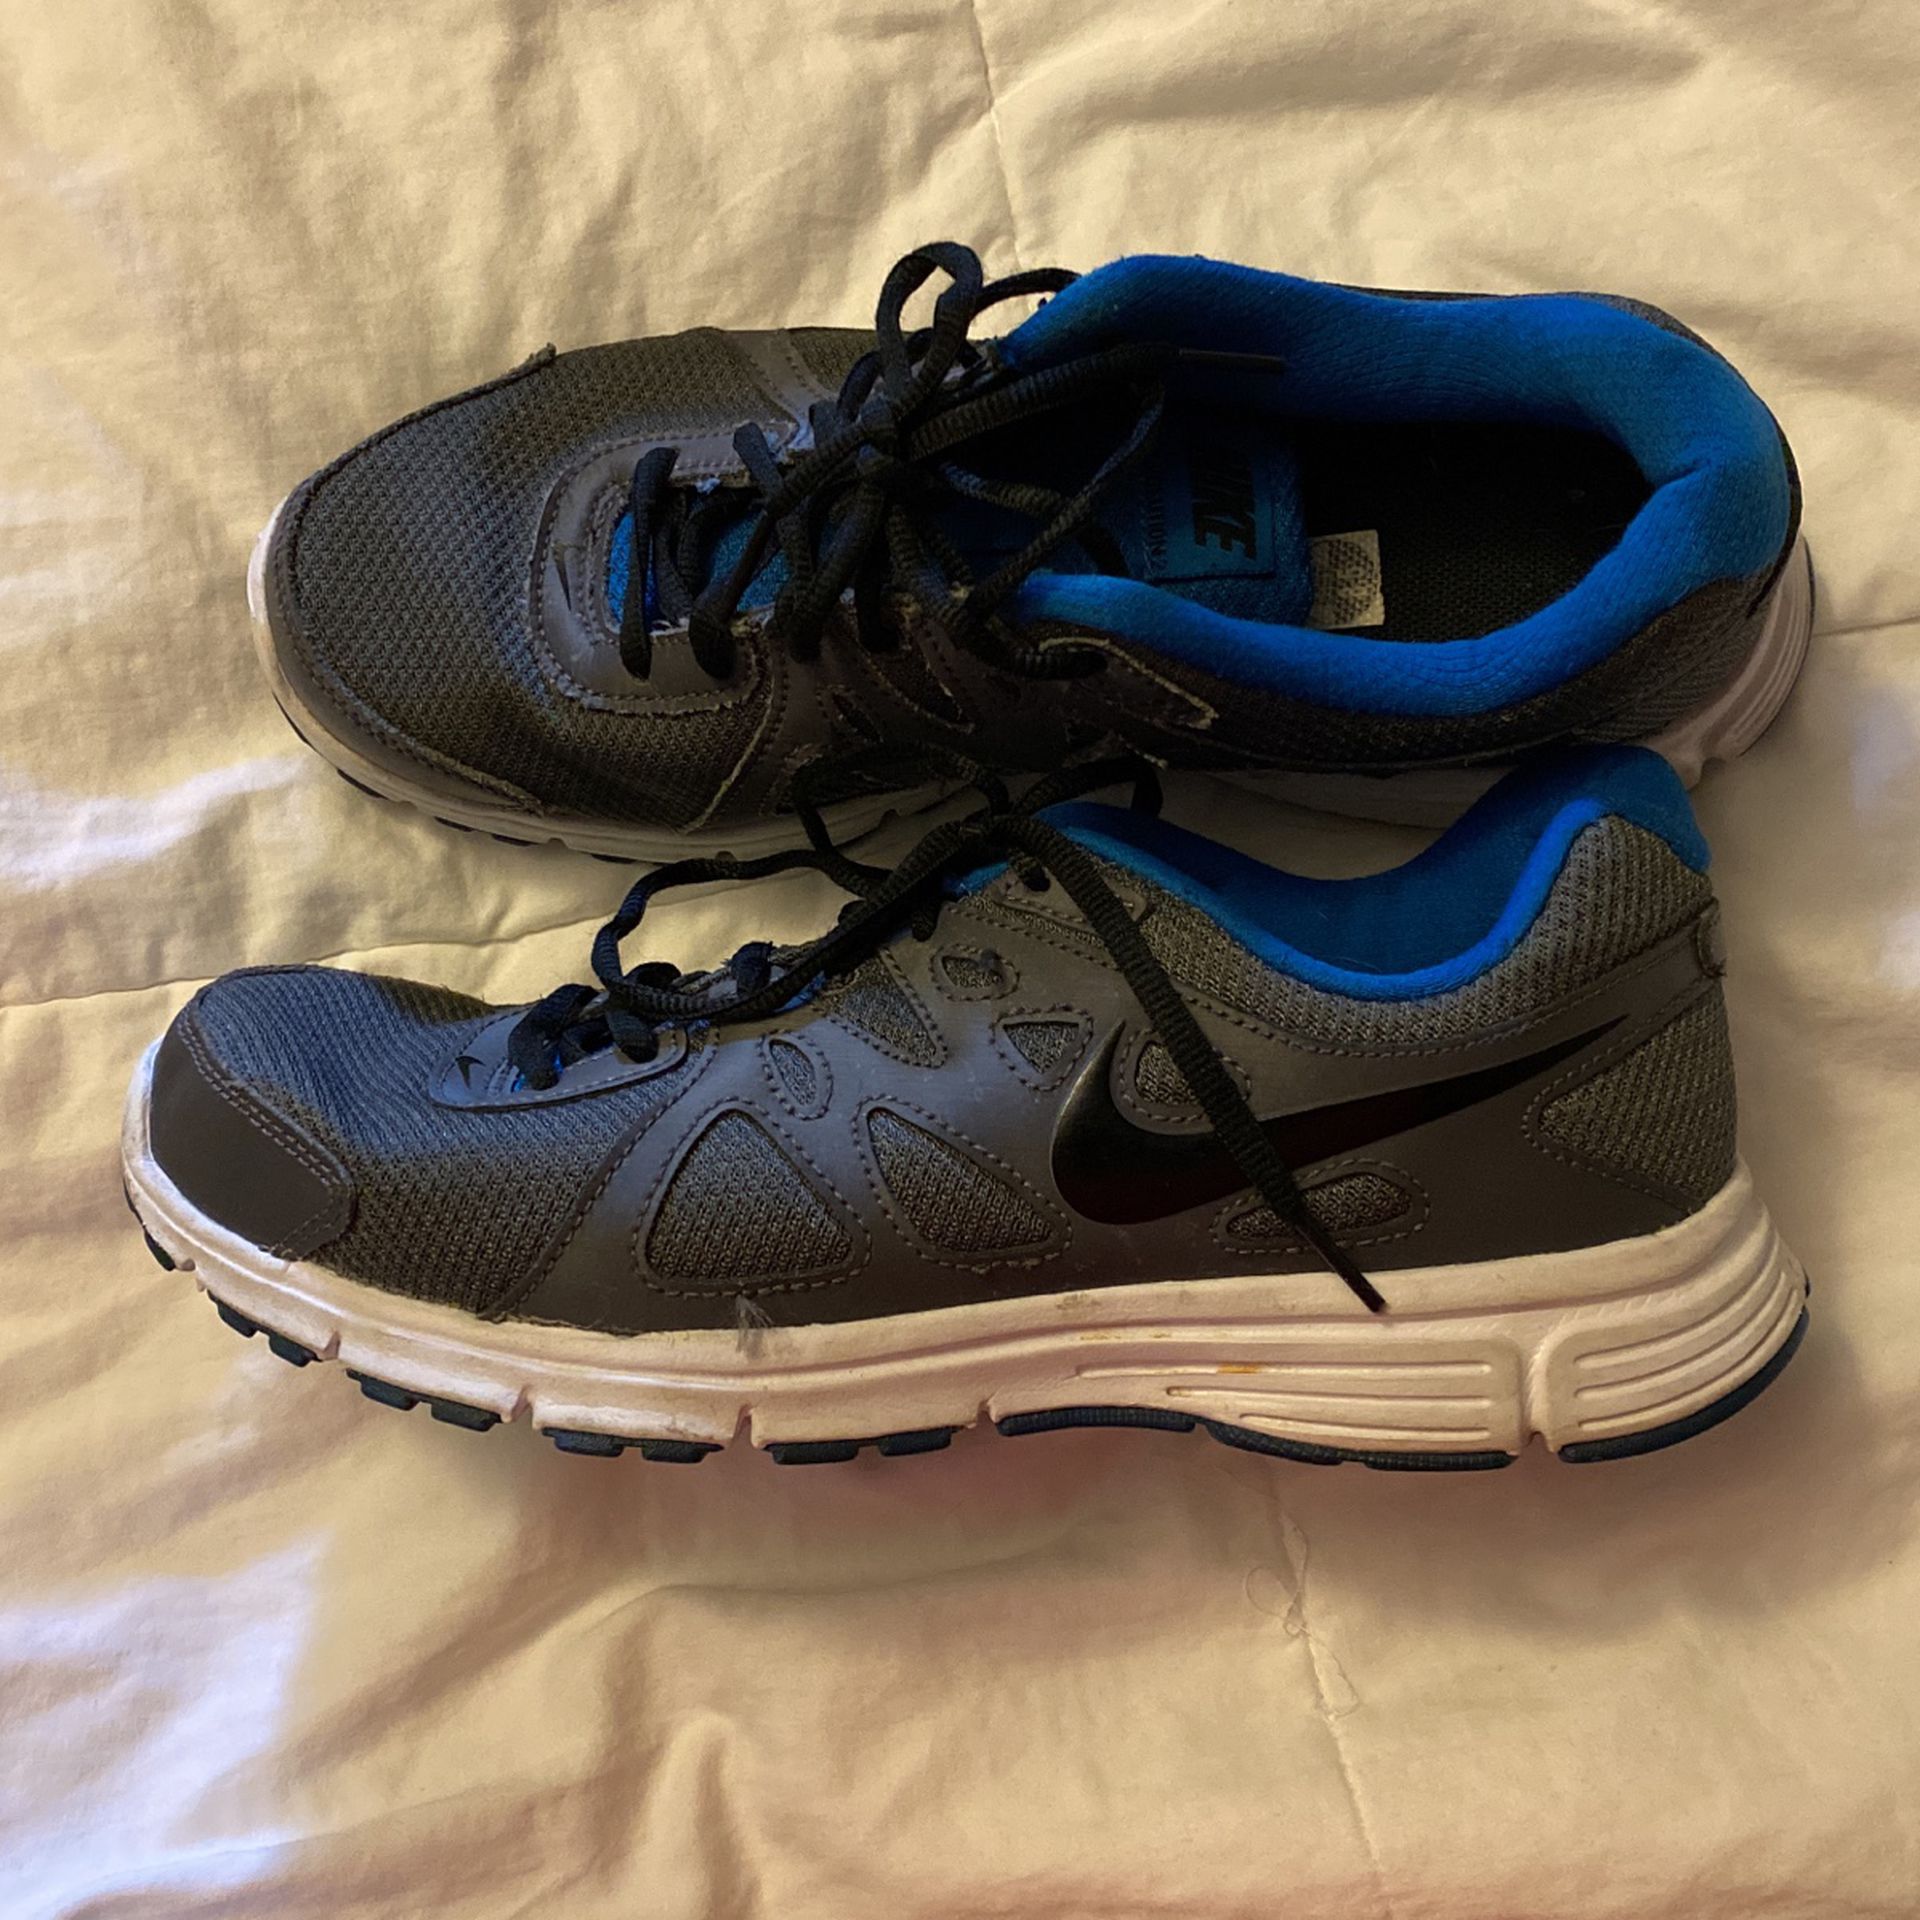 Nearly New Nike Lightweight Shoes, Size 8.5 Mens